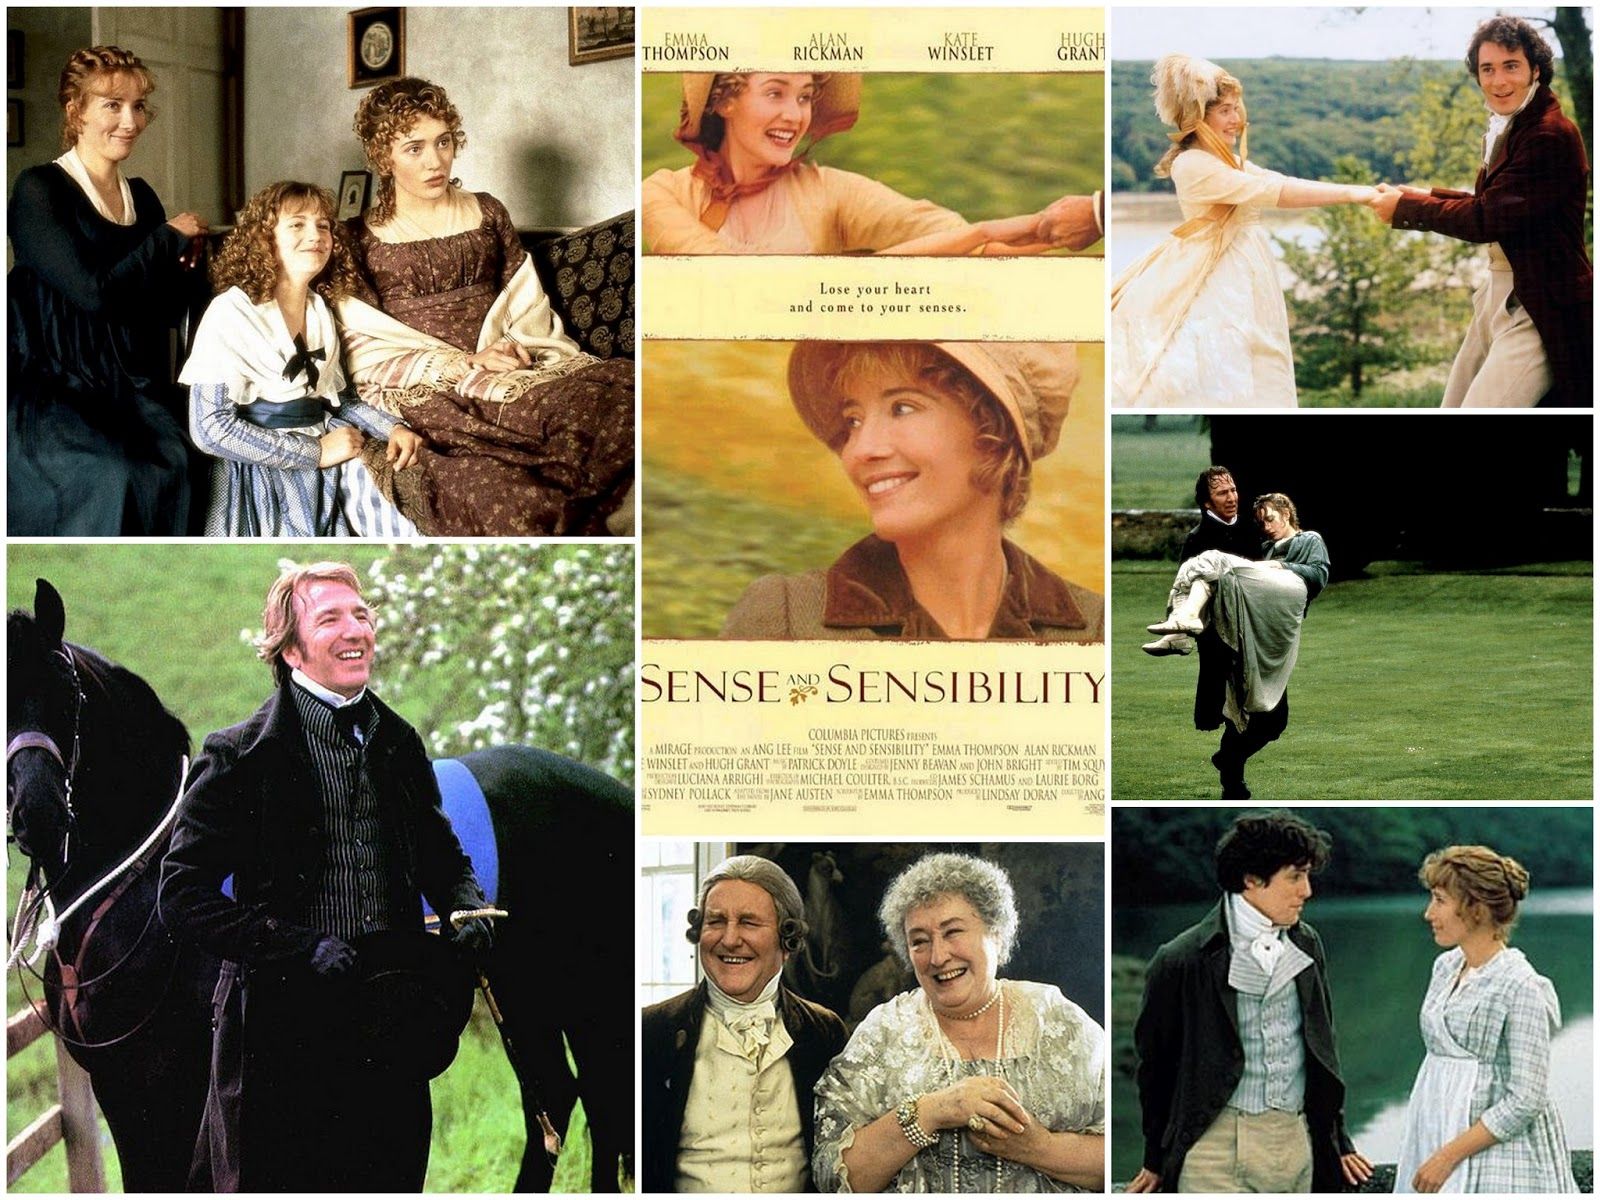 Sense and Sensibility: text, image, music, video. Glogster EDU multimedia posters